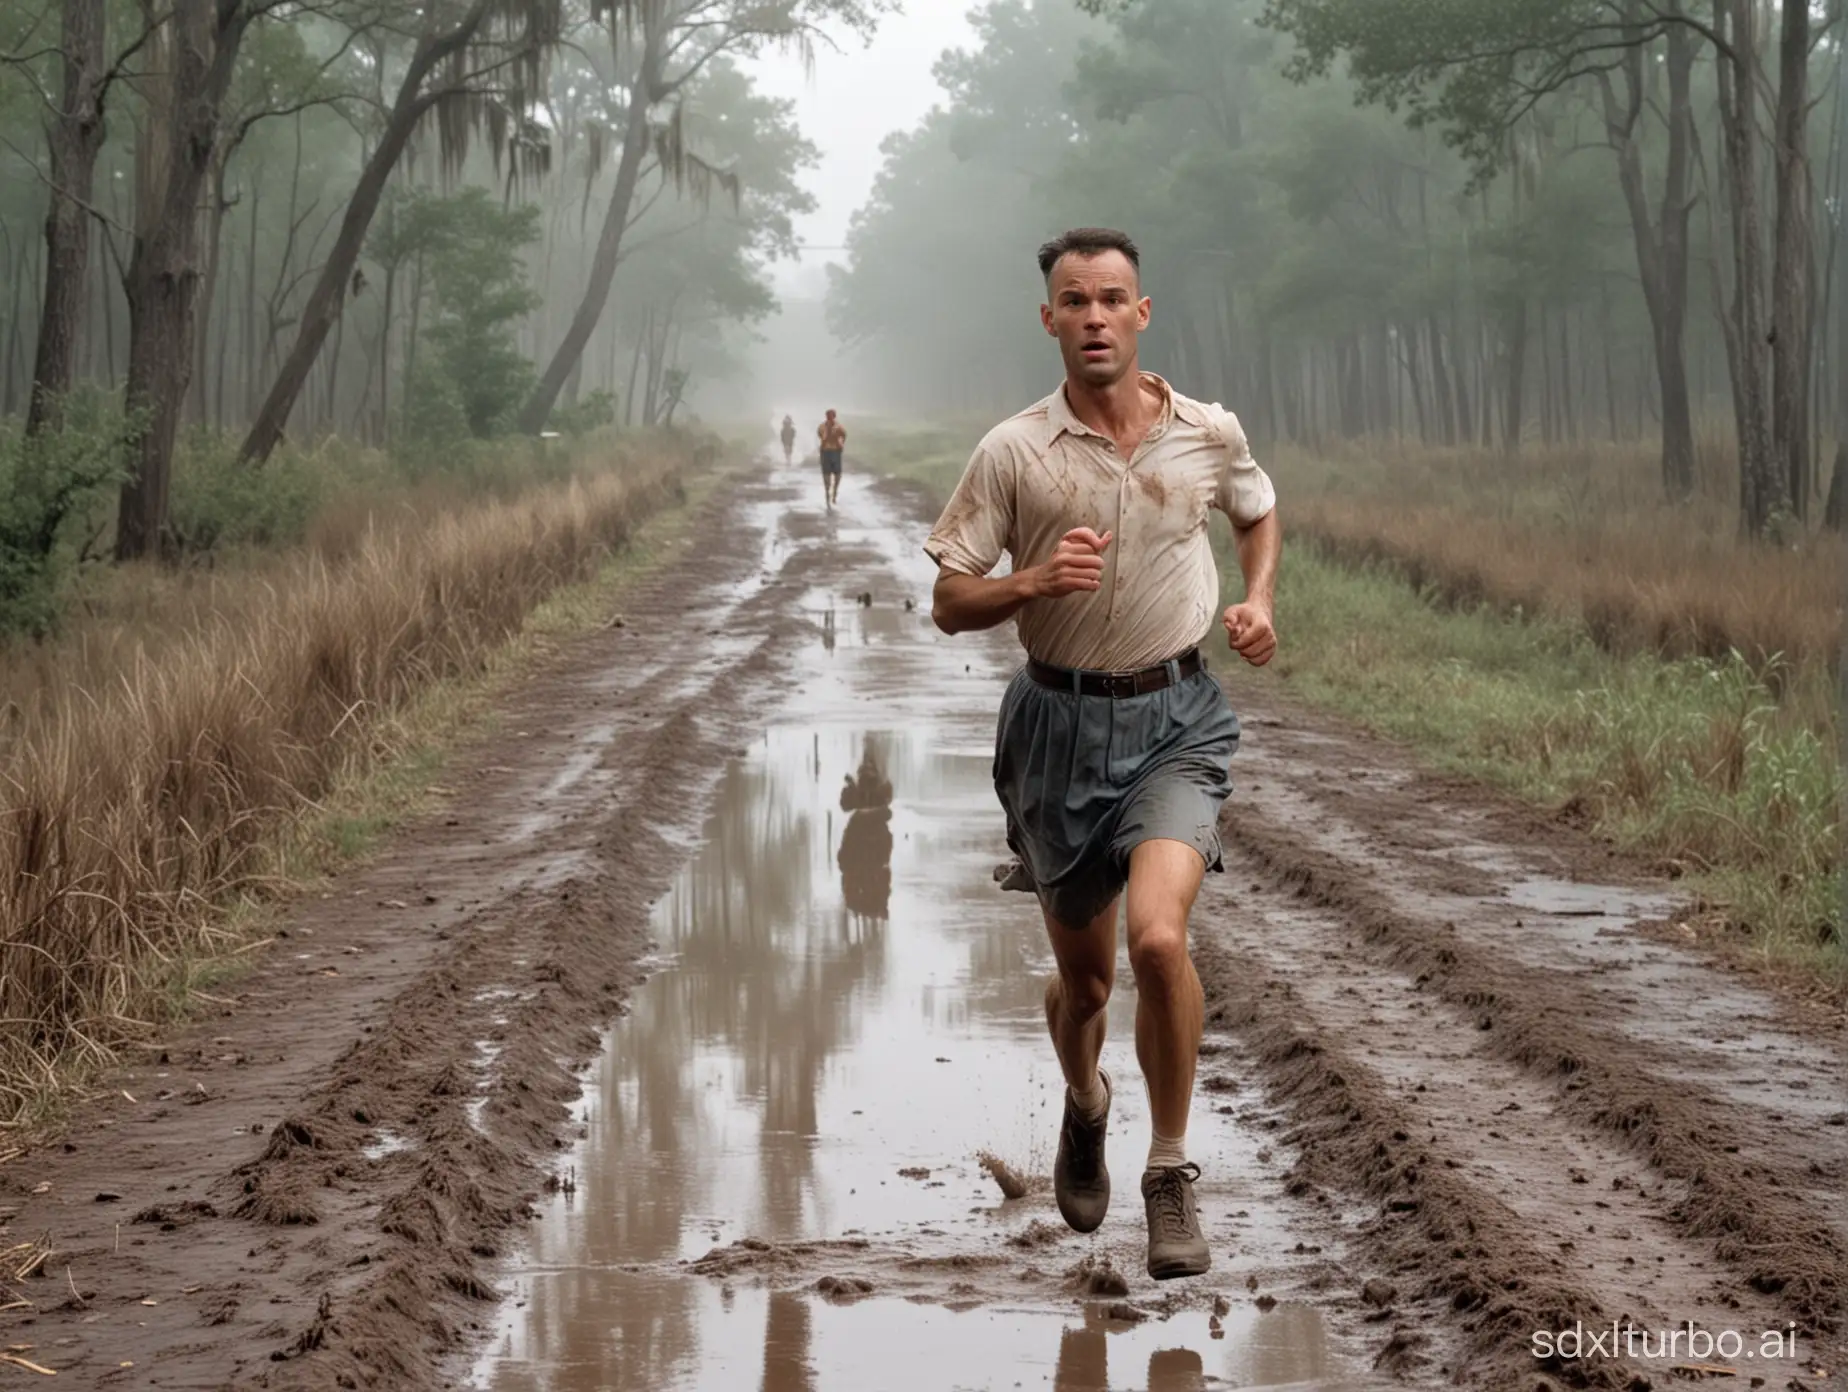 Forrest Gump is running on a muddy road.